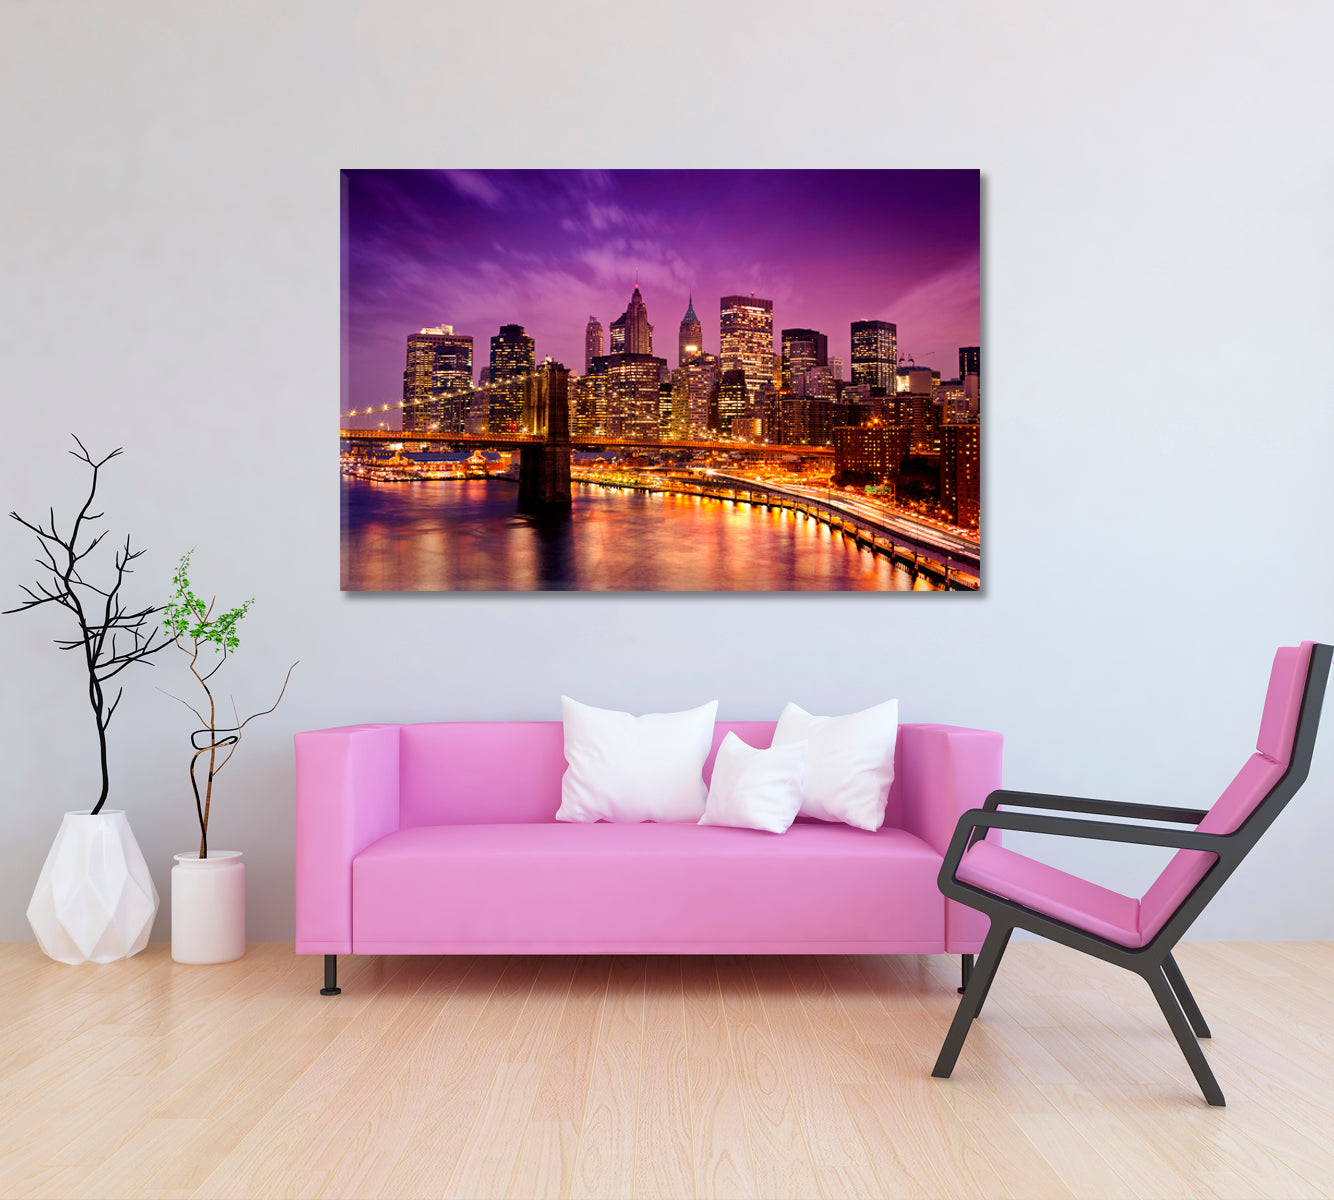 New York Downtown Skyline Canvas Print ArtLexy 1 Panel 24"x16" inches 